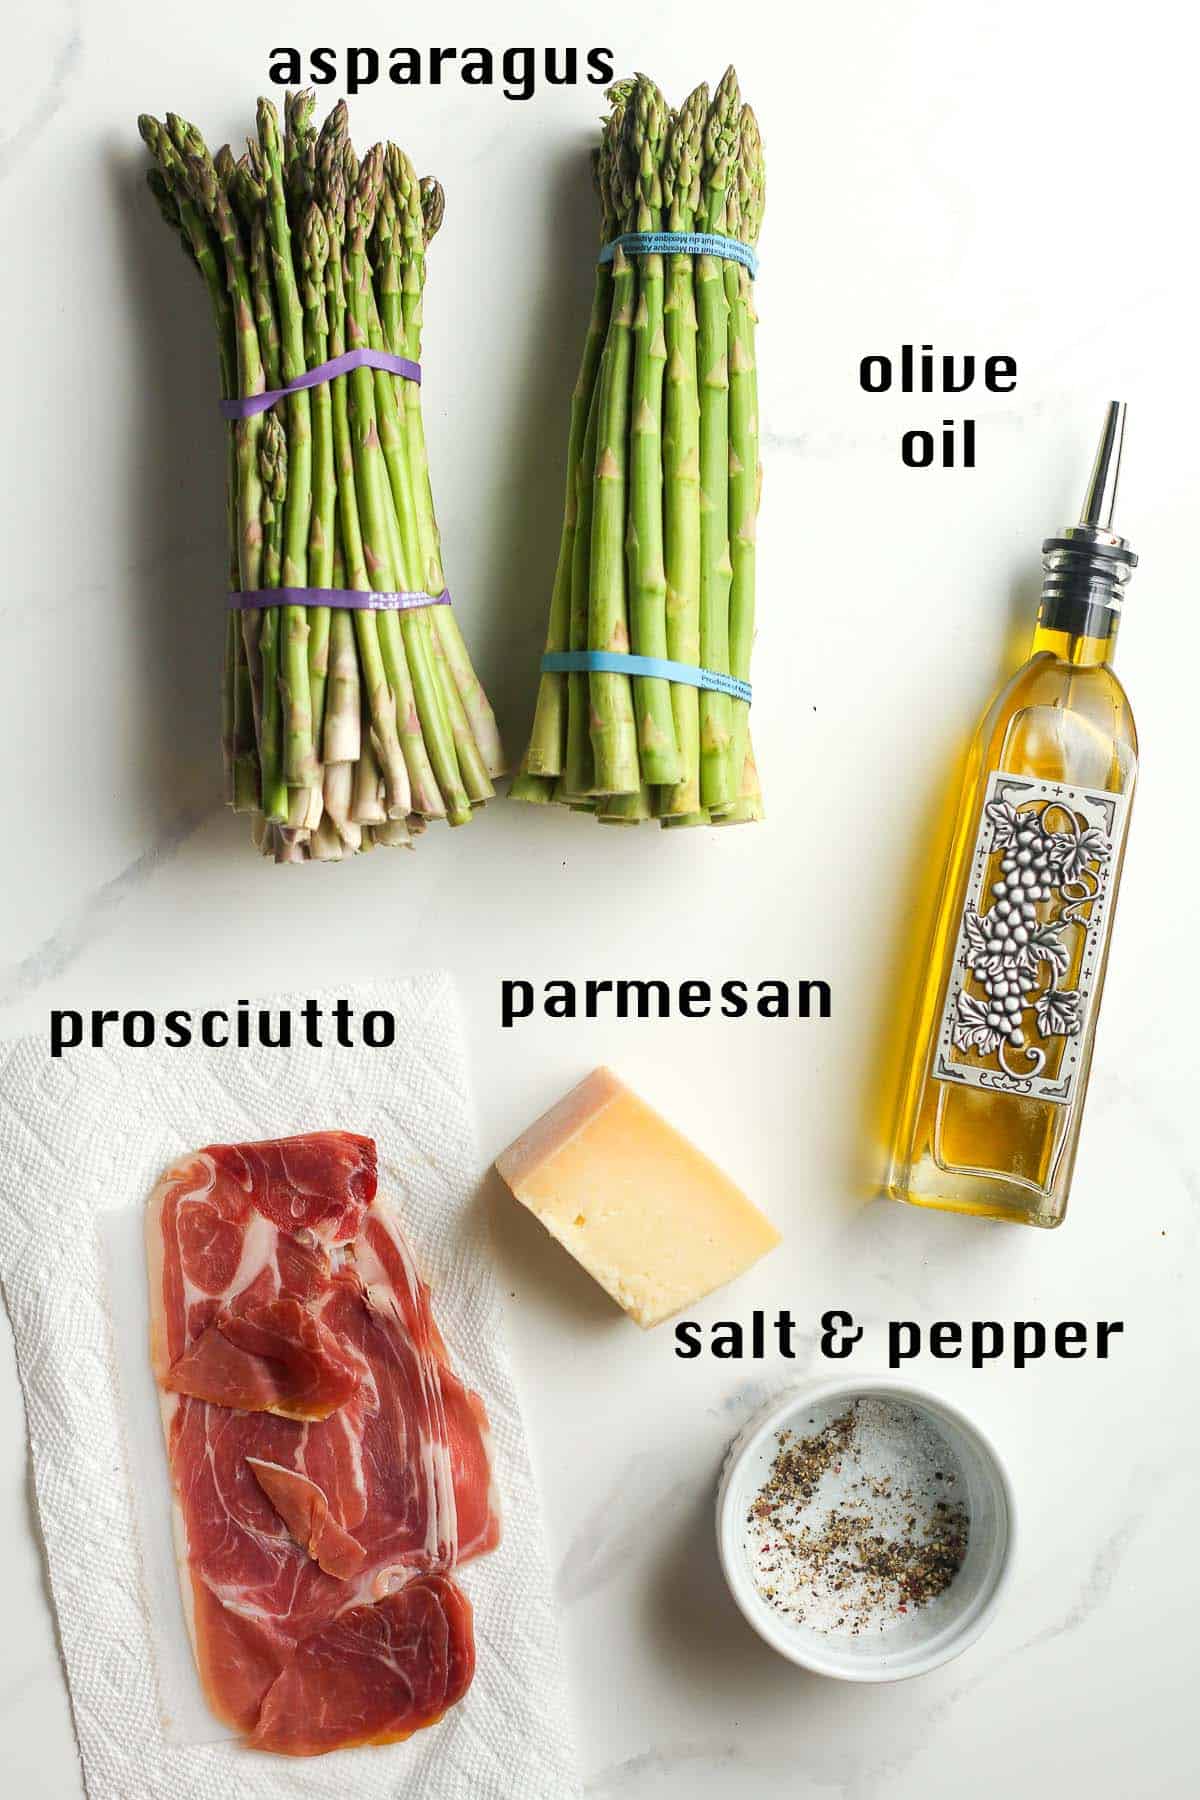 The ingredients for the roasted asparagus on a white background.